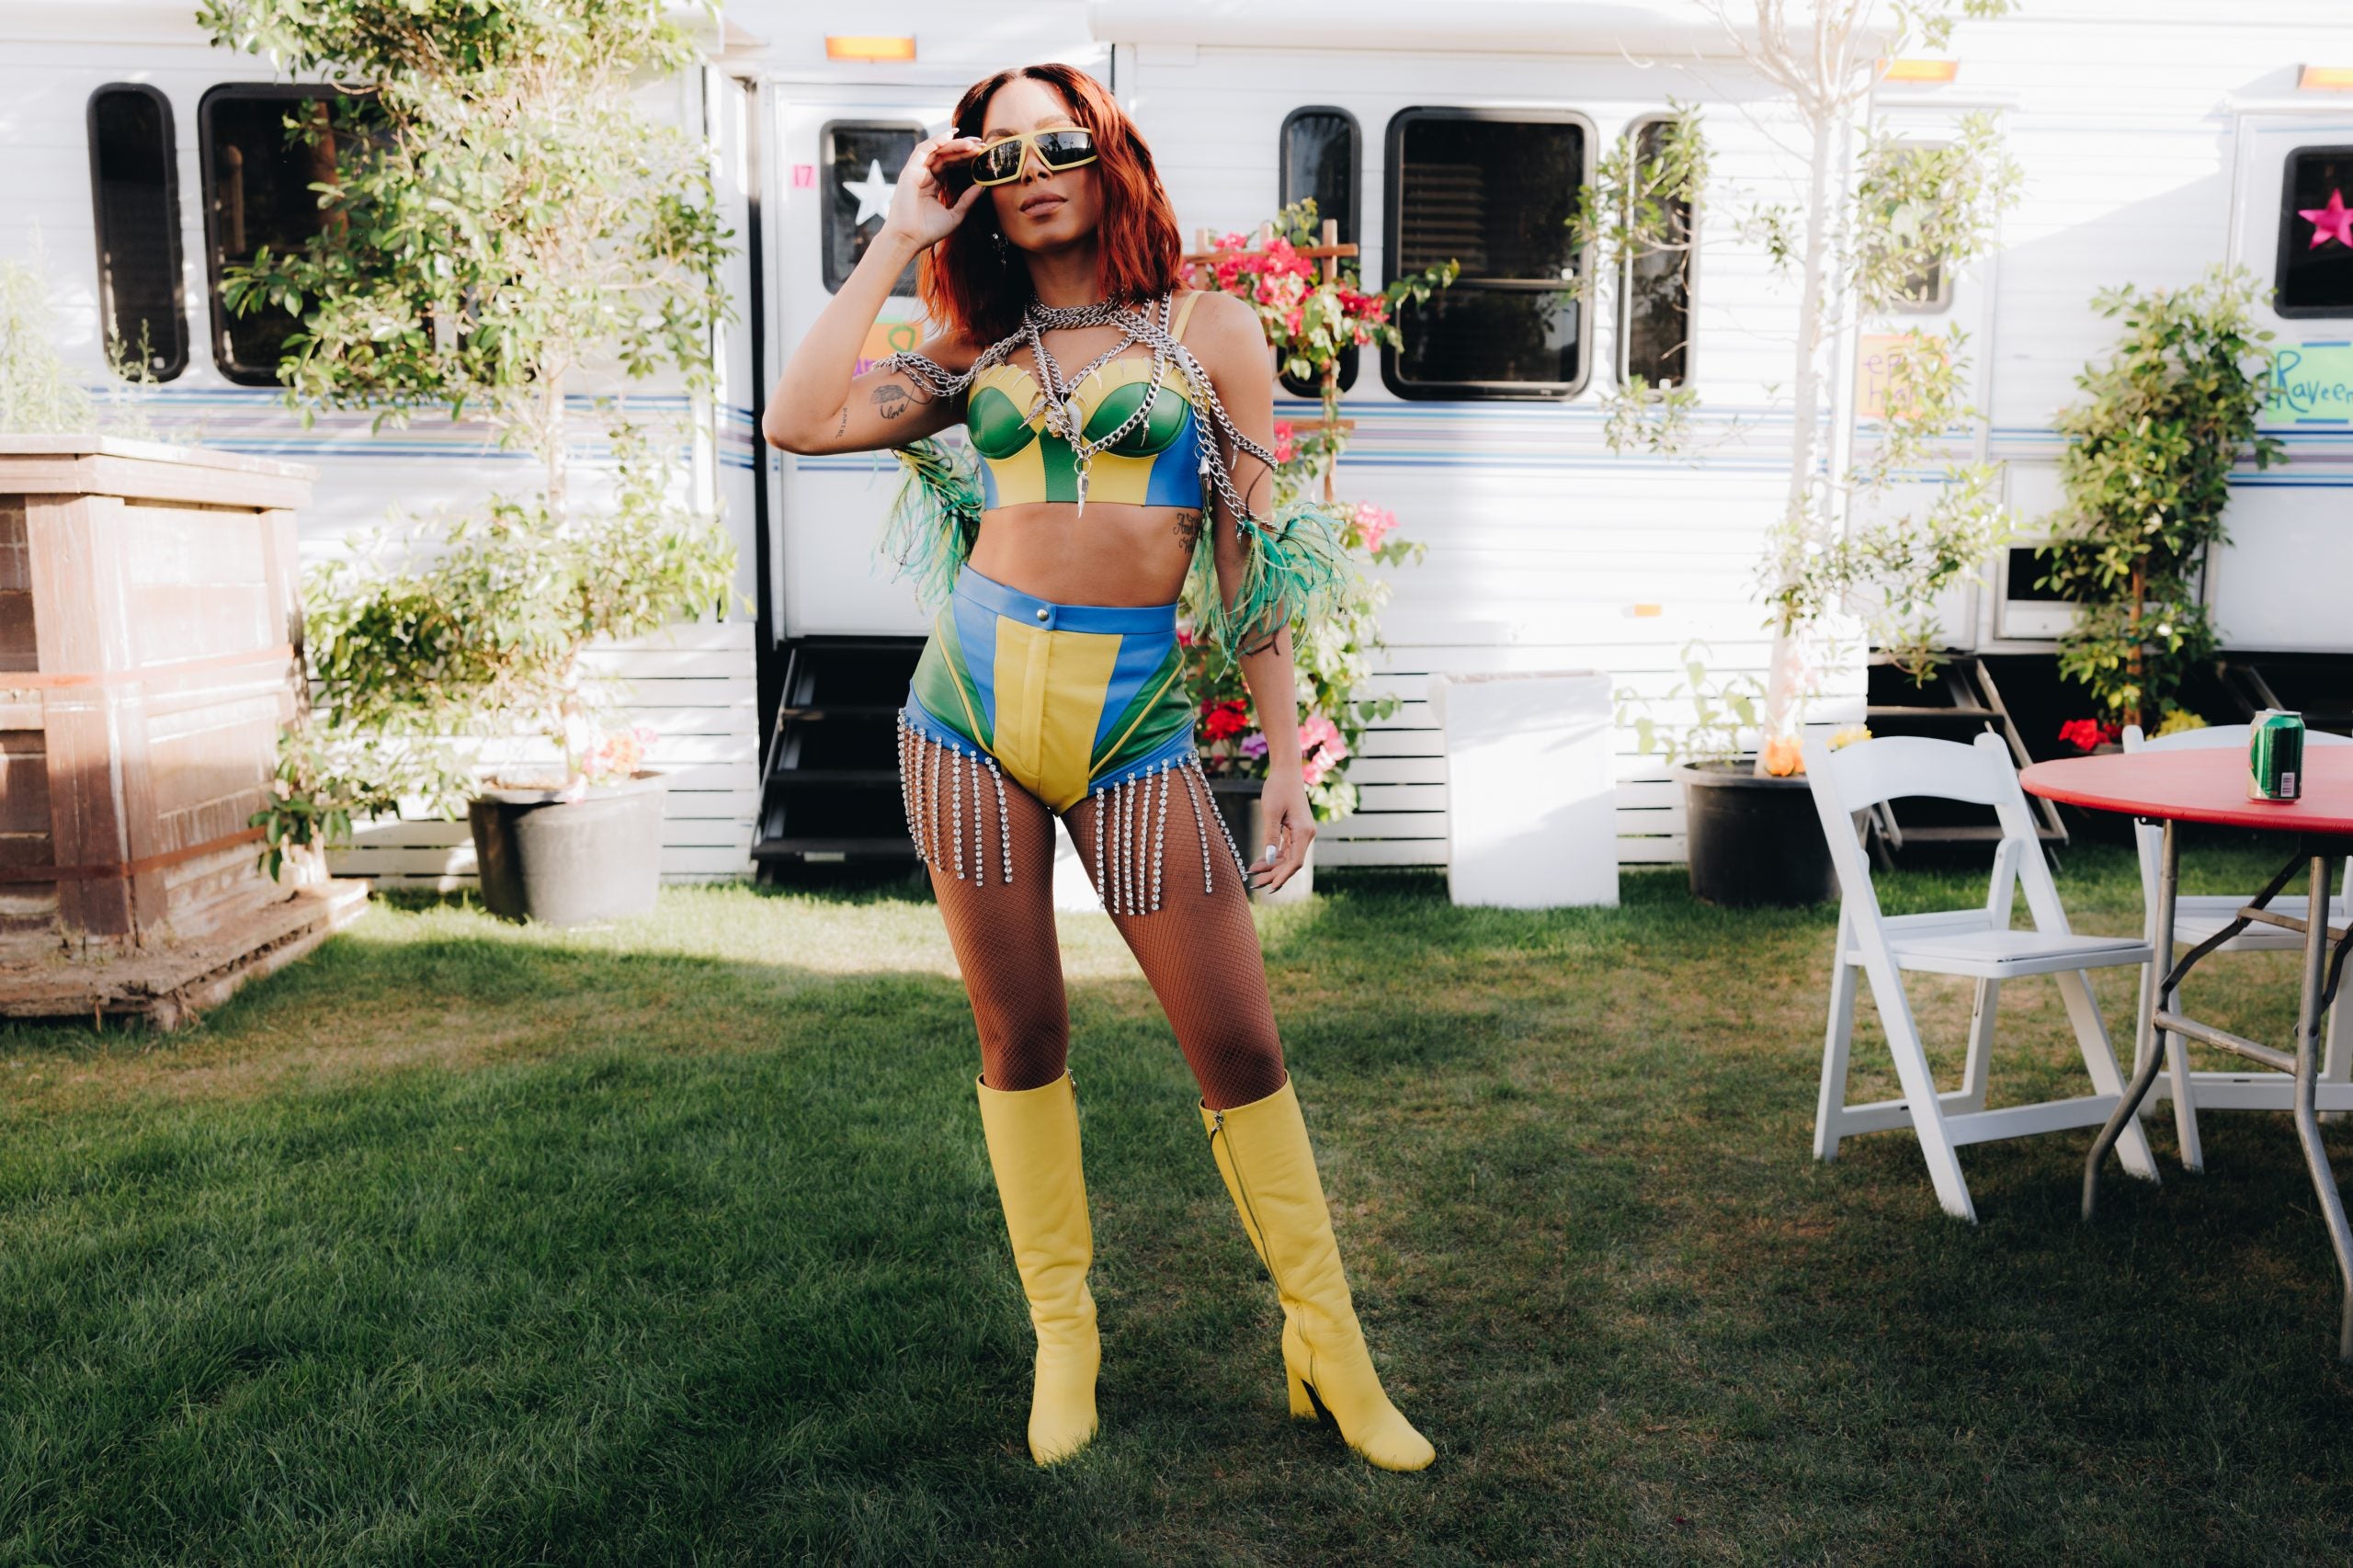 The Best Celebrity Looks From Coachella 2022